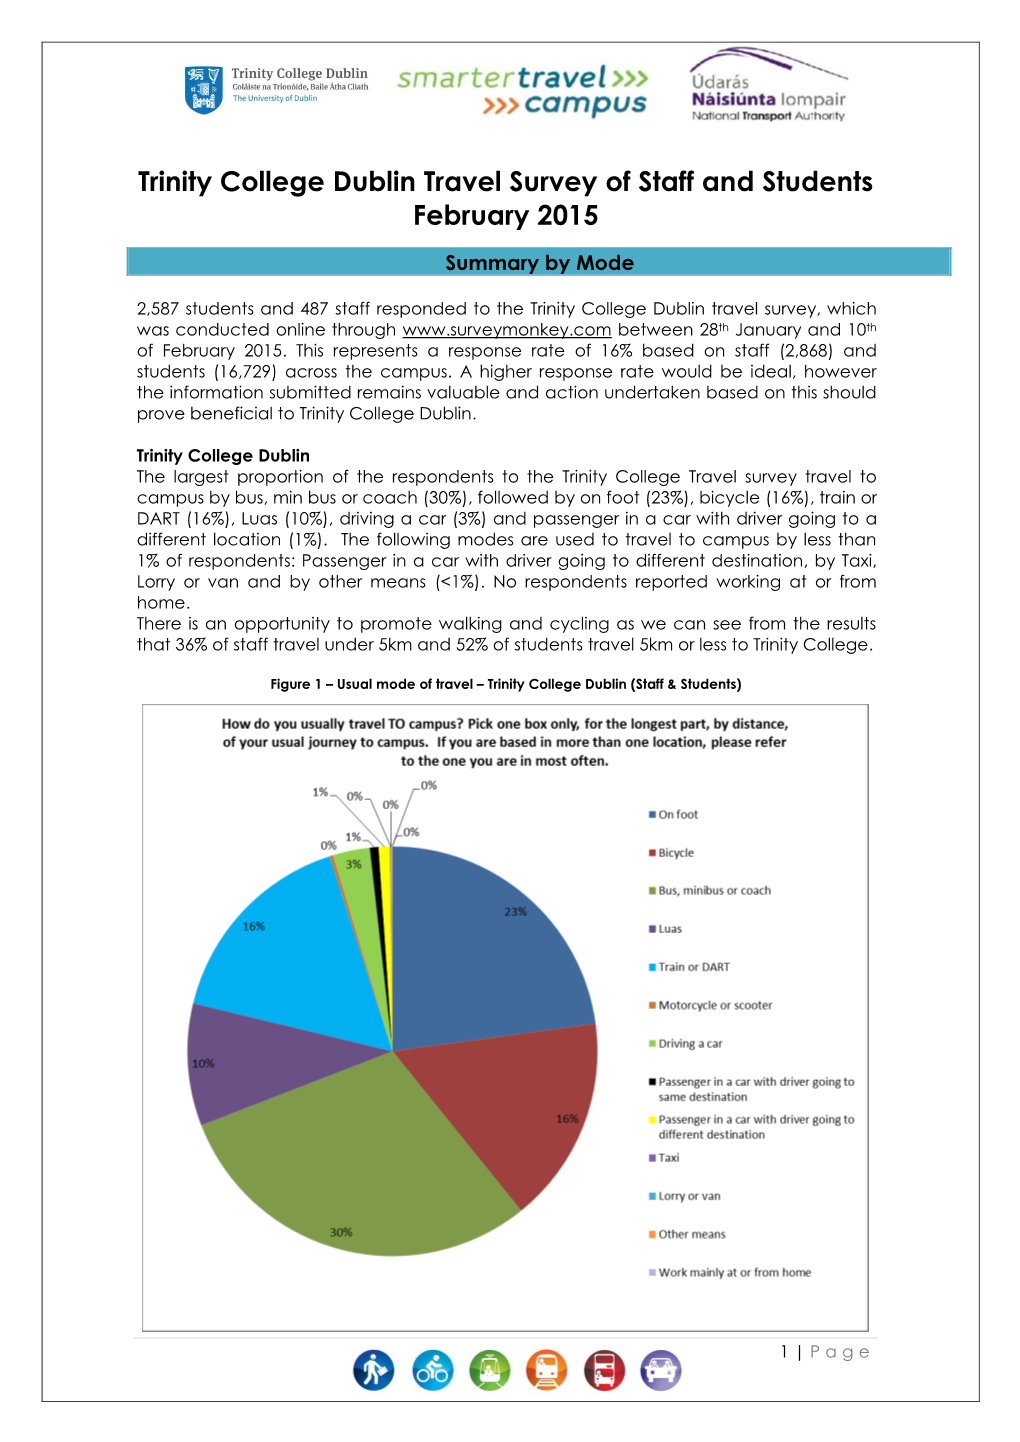 Trinity College Dublin Travel Survey of Staff and Students February 2015